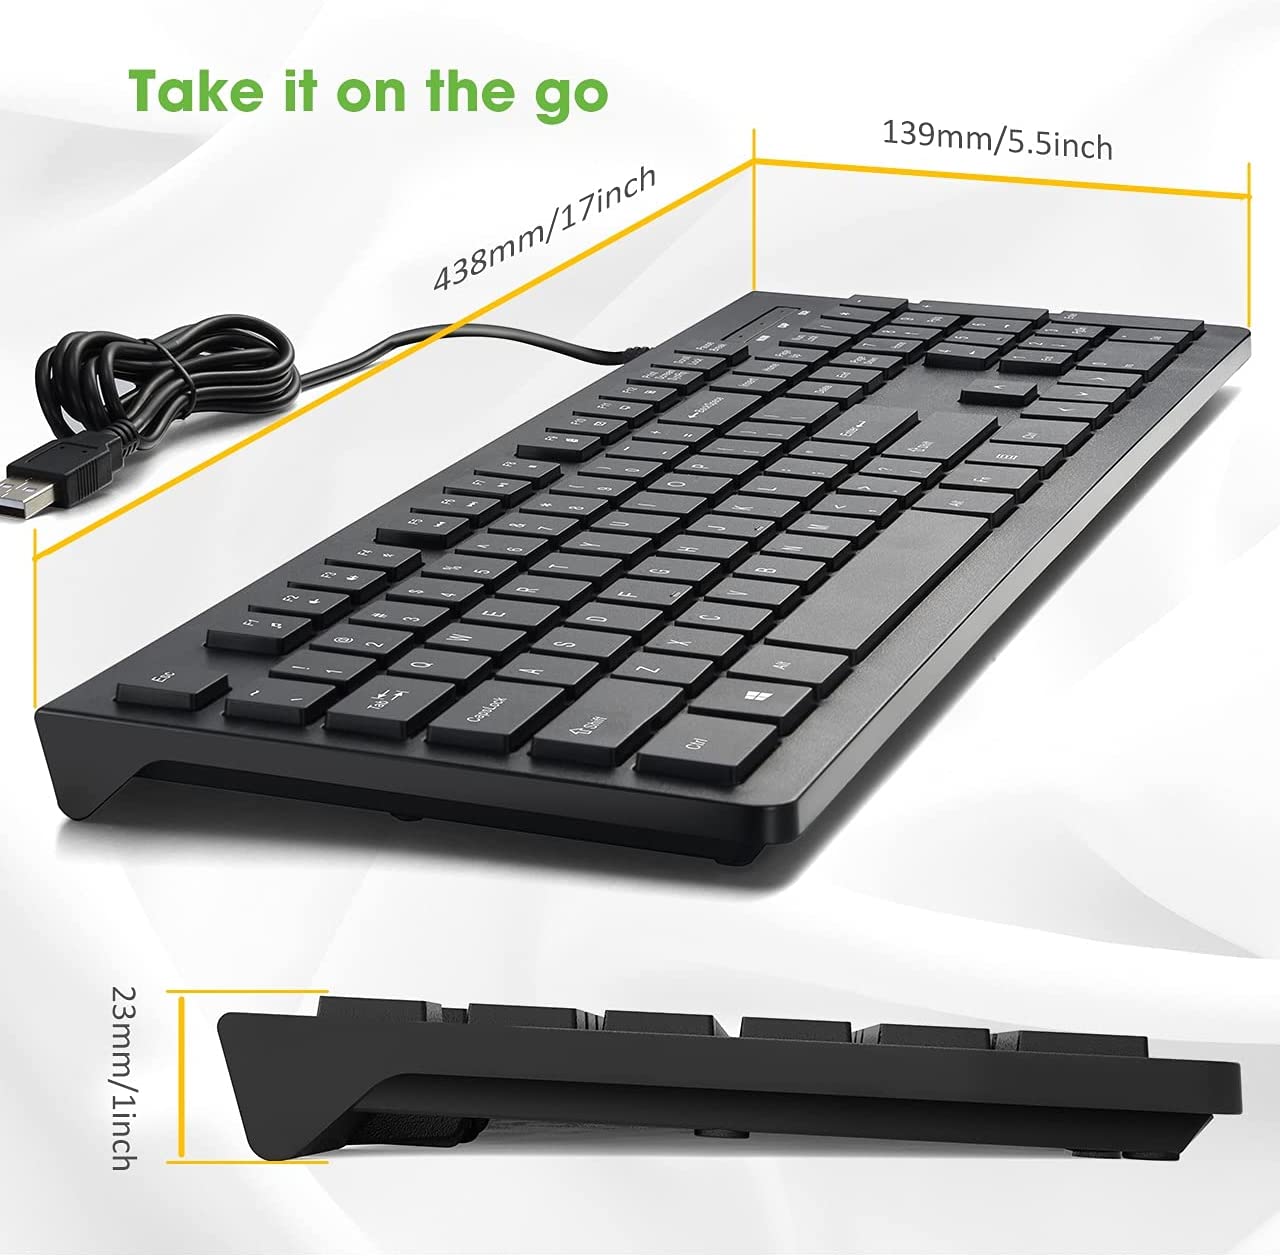 Victsing Quiet Wired Keyboard, Plug Play USB Computer Keyboard Low Profile  Chiclet Keys, Full Size, Spill-Resistant, Large Number Pad Foldable Stands  Anti-Wear Slim Keyboard for Windows Mac PC Laptop